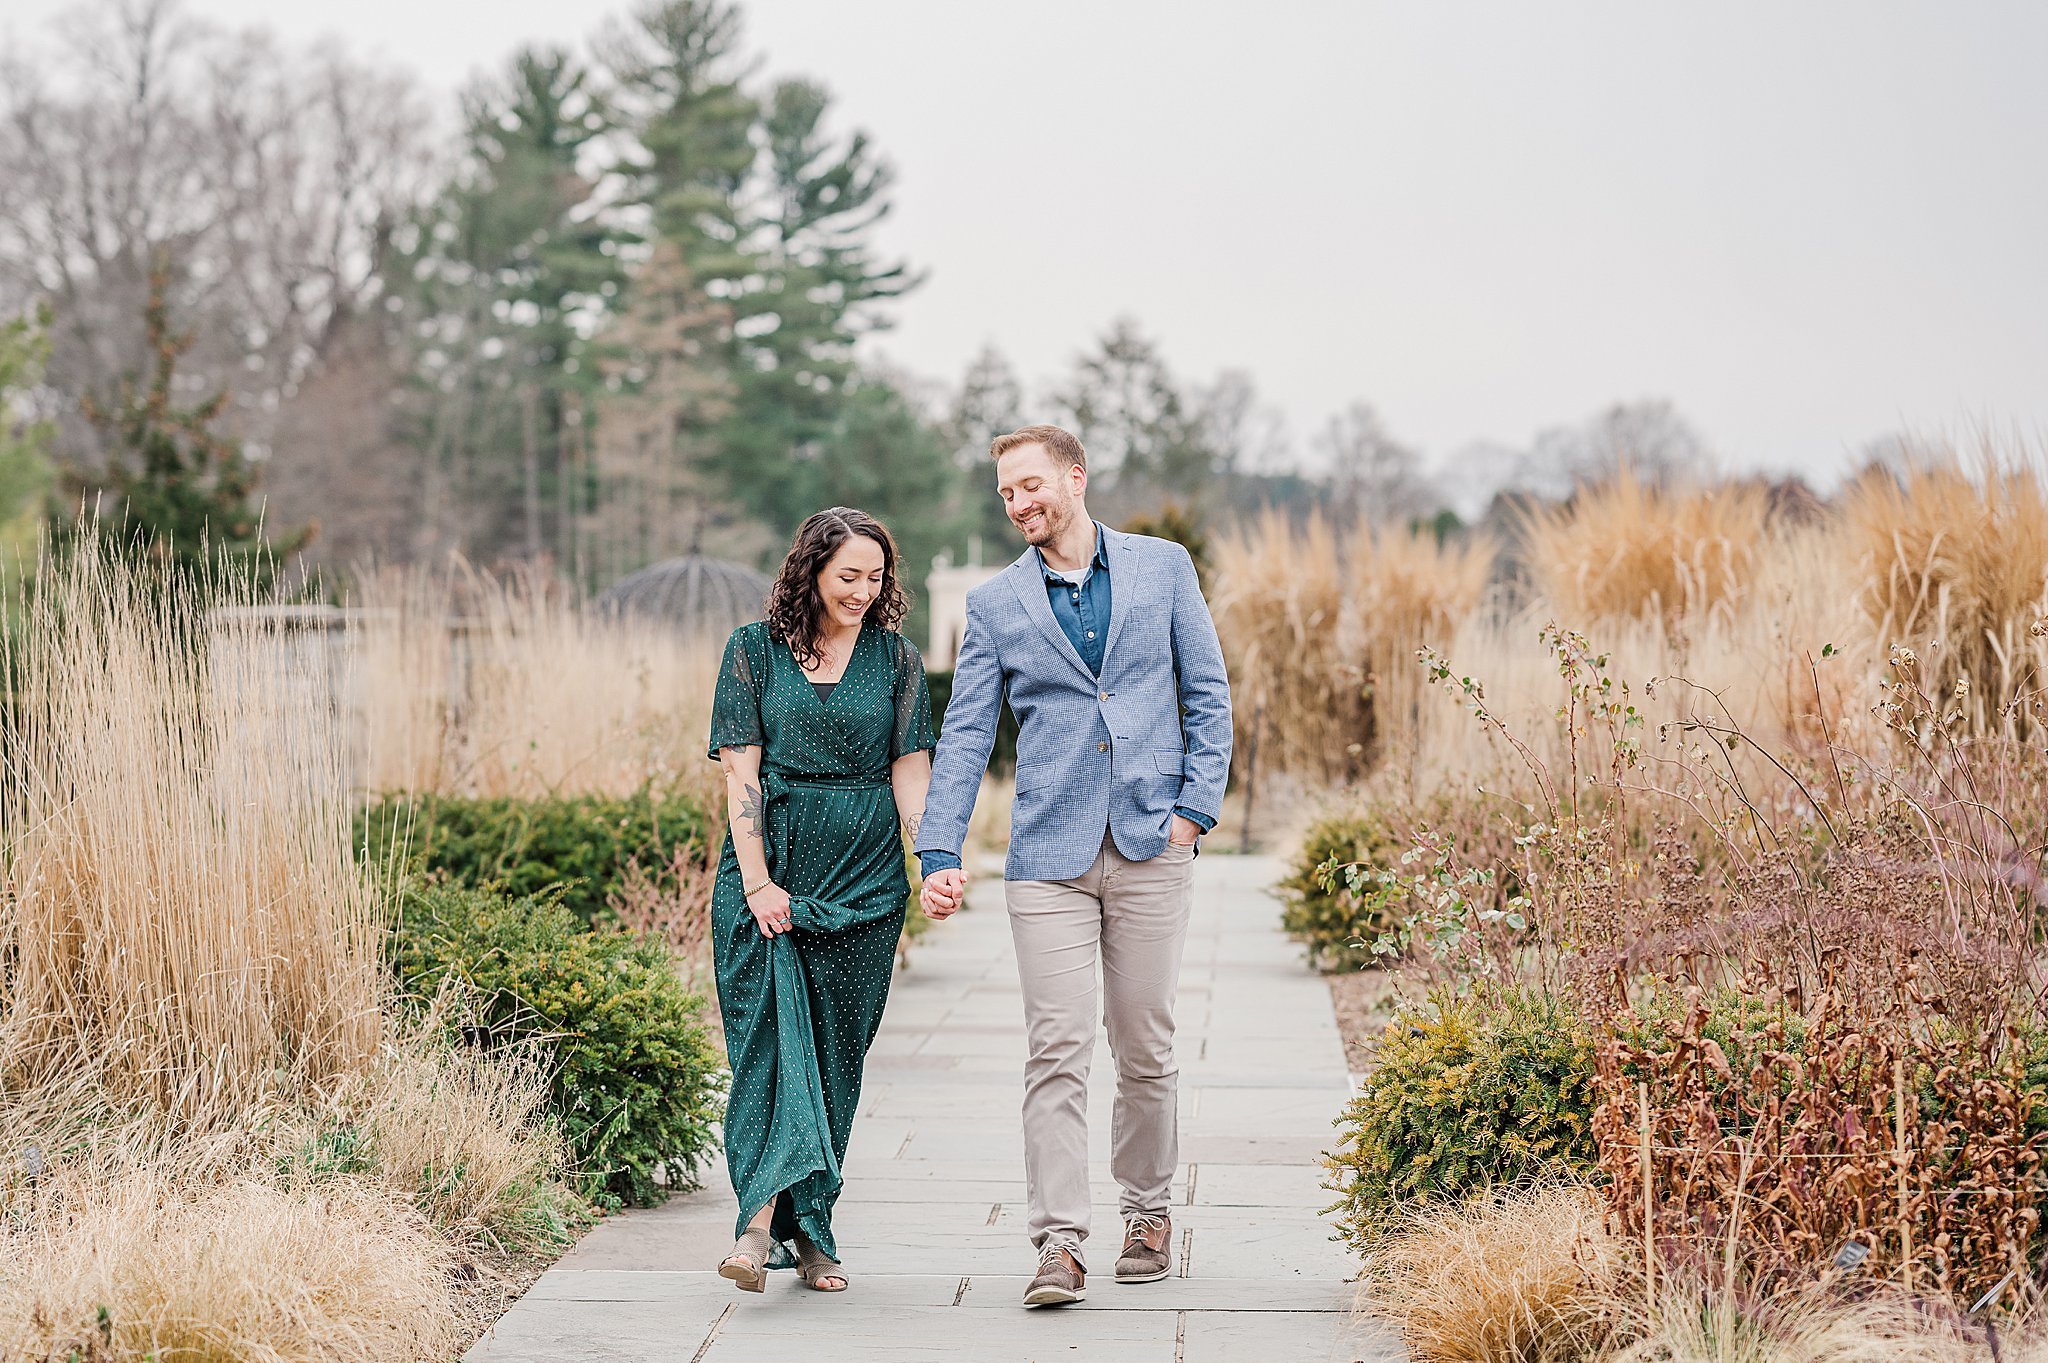 Longwood Gardens Winter Engagement Session Photography Session_4166.jpg